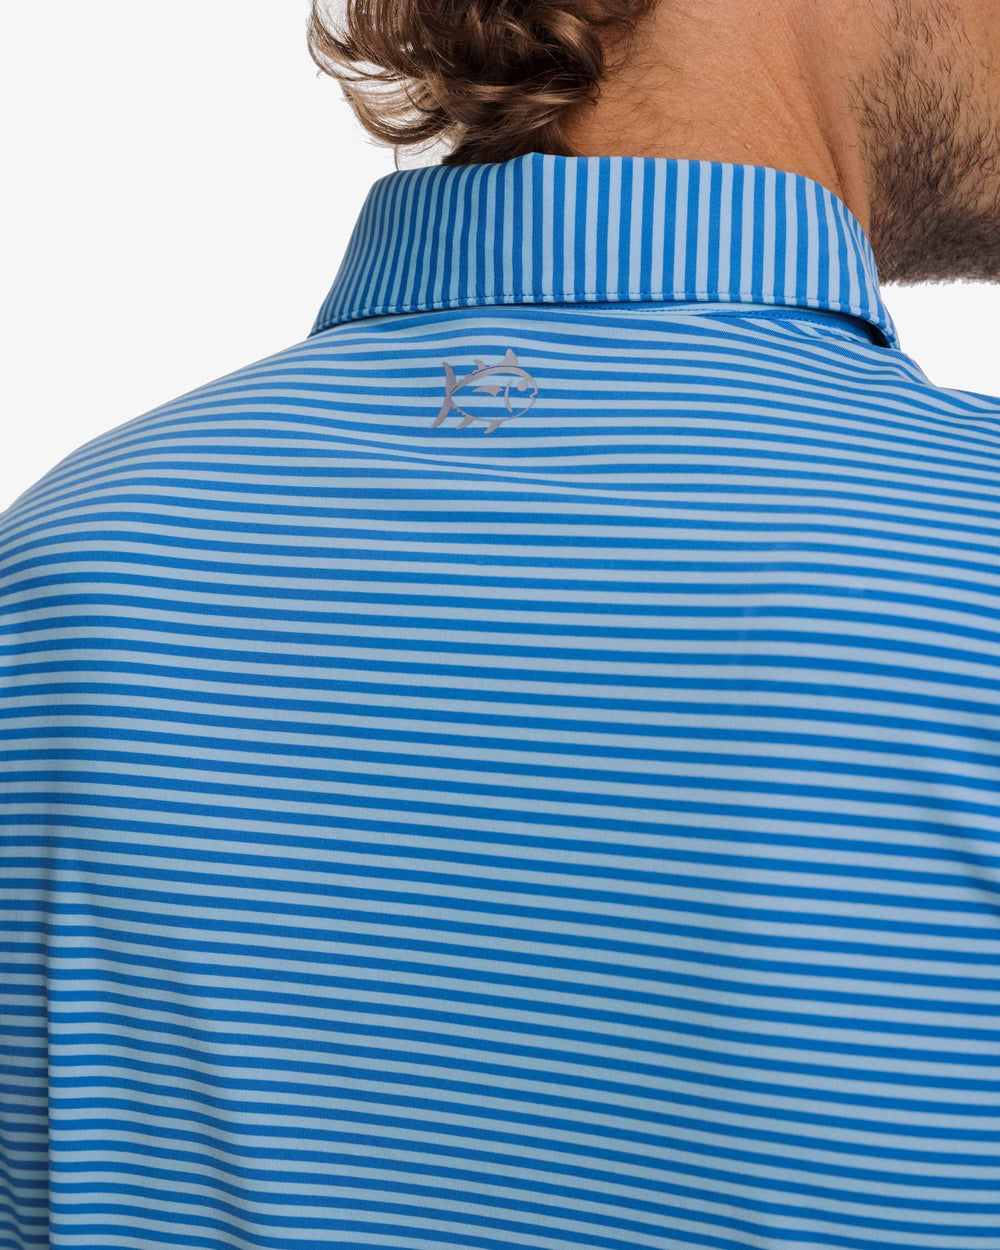 The detail view of the Southern Tide Shores Stripe brrr eeze Performance Polo Shirt by Southern Tide - Rain Water